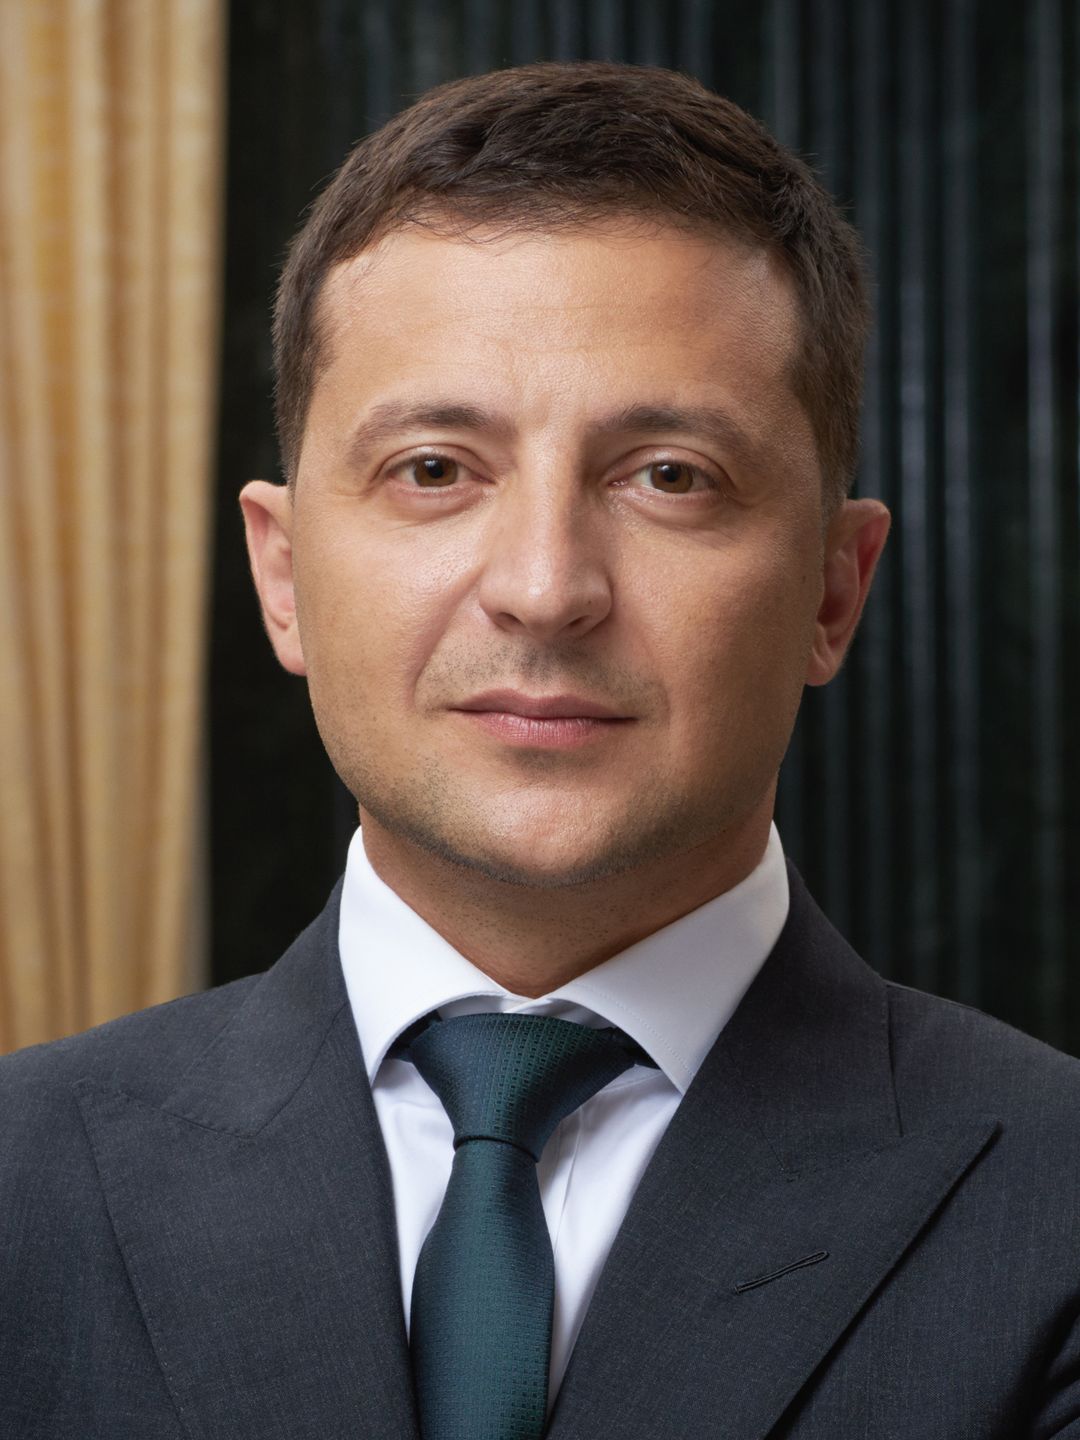 Volodymyr Zelenskiy who is his father